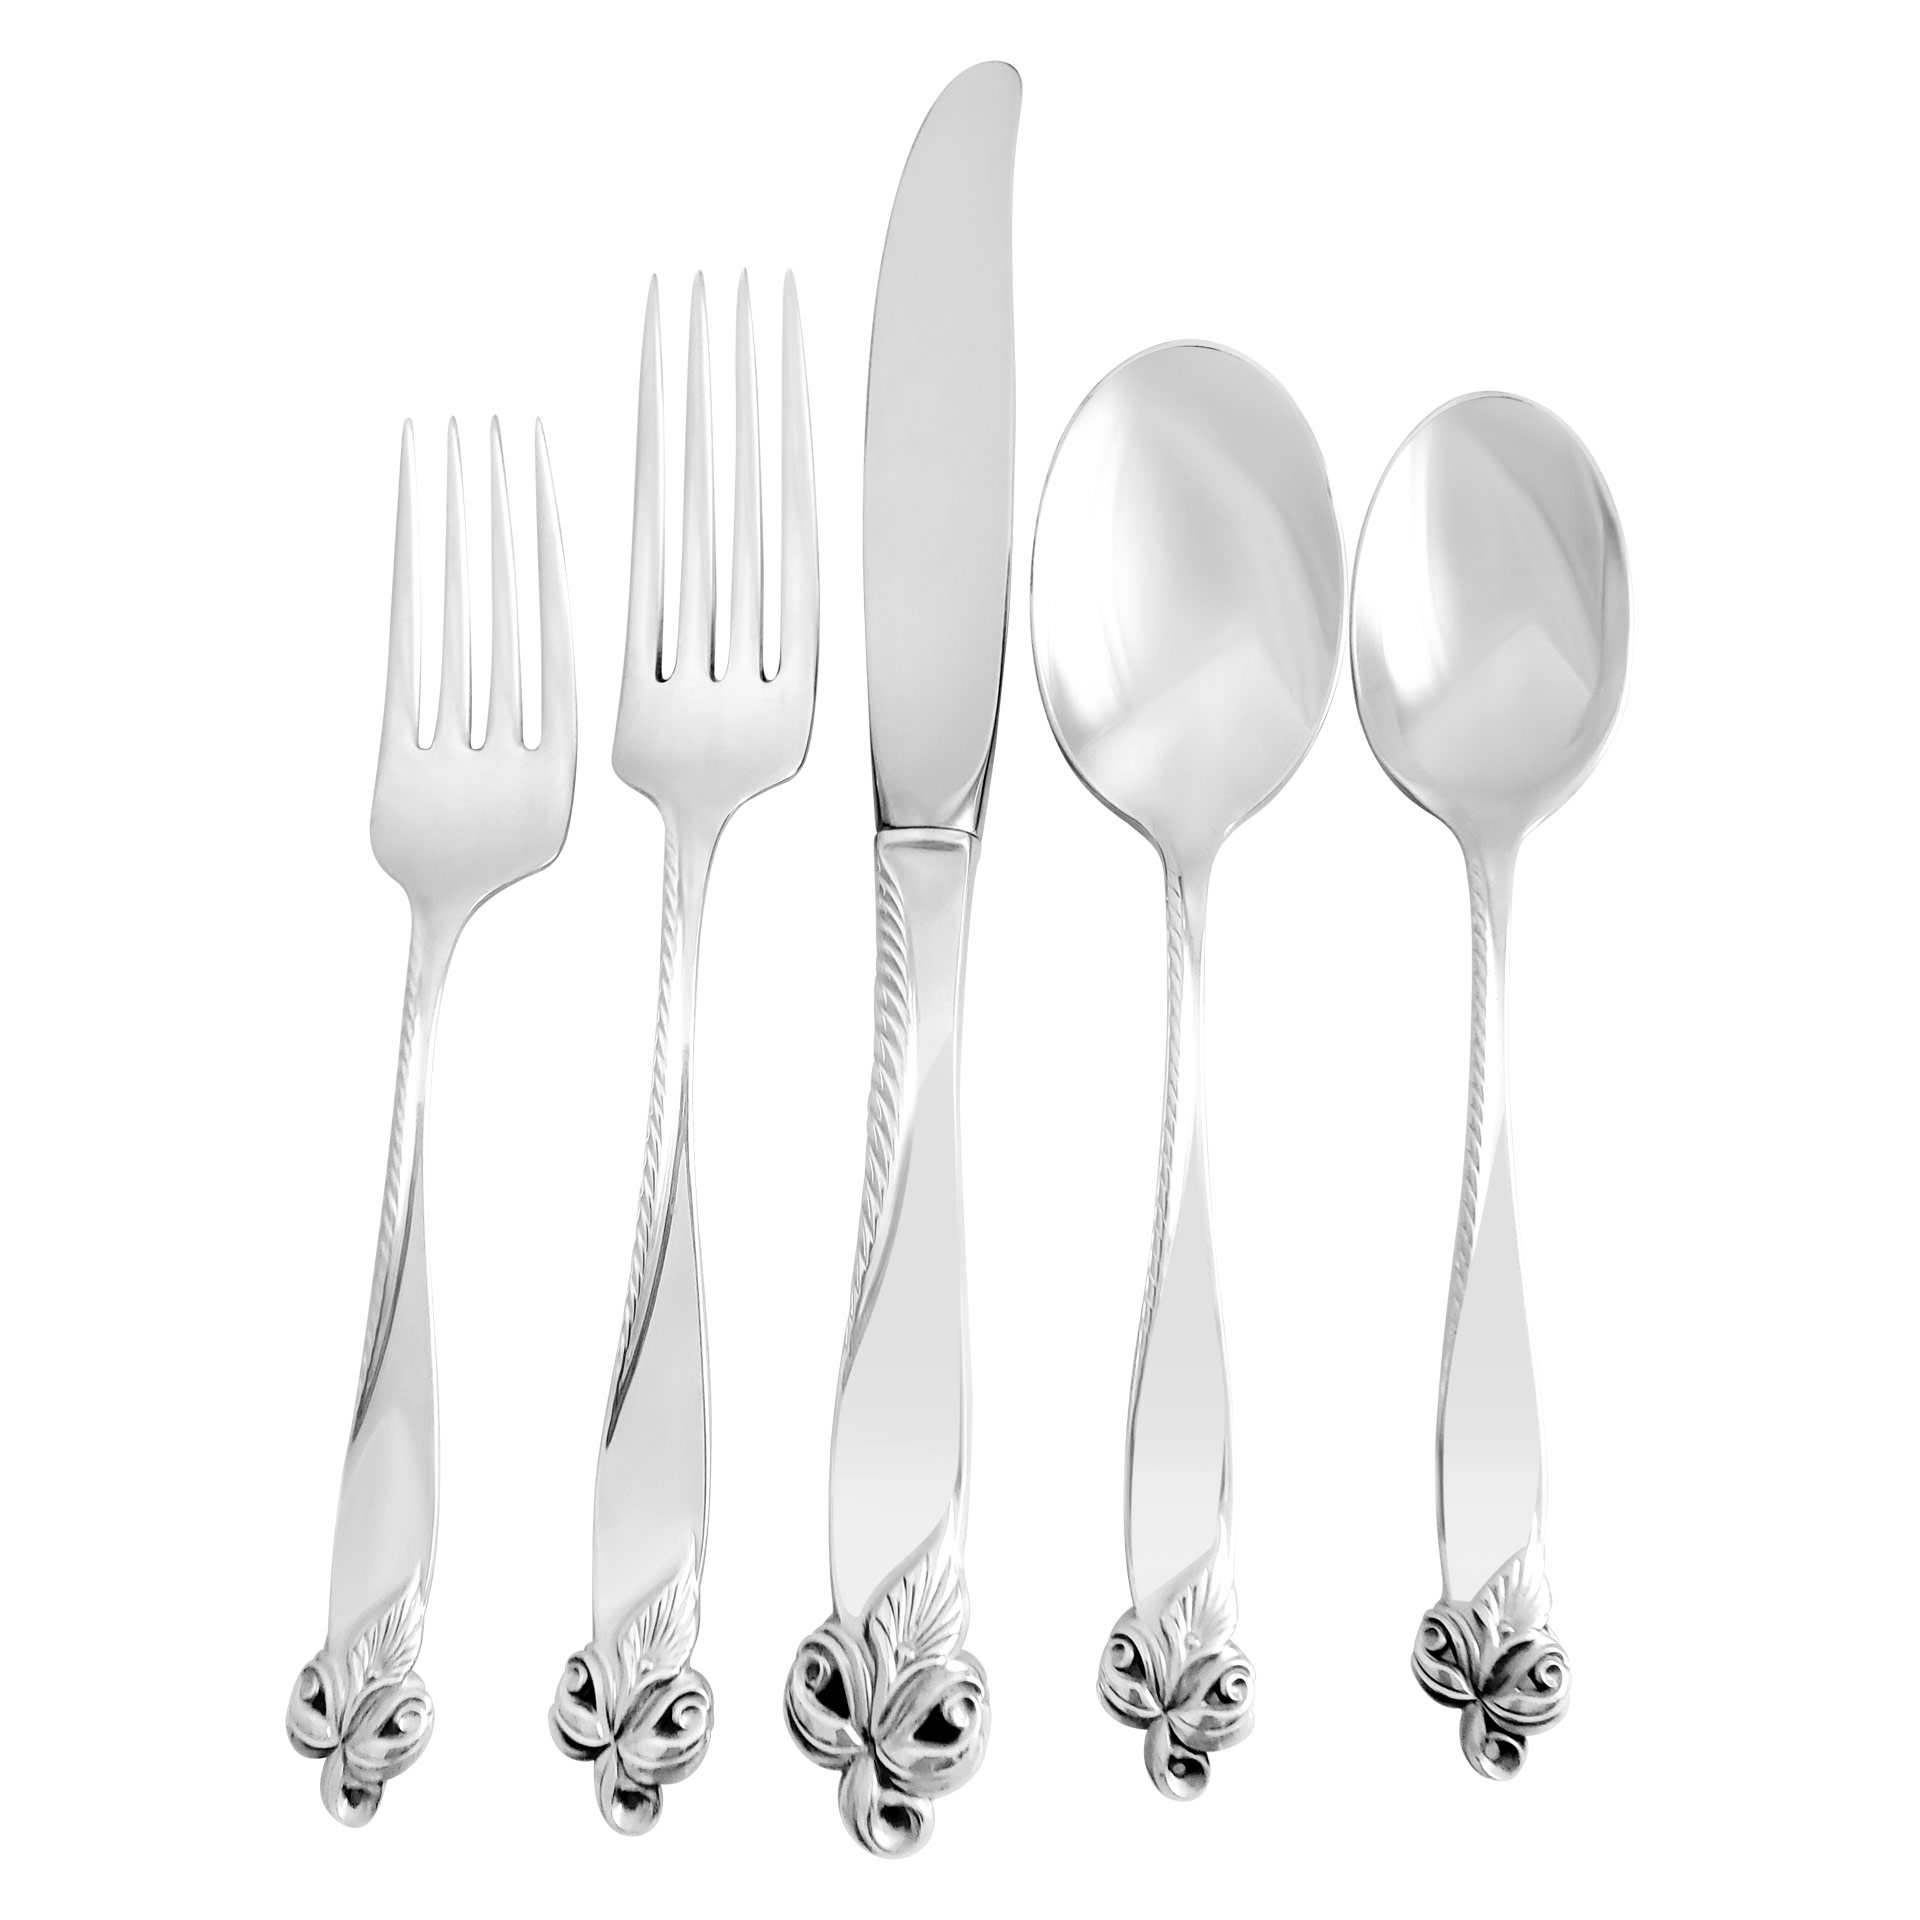 "ORCHID ELEGANCE" Sterling Silver Flatware set, patented in 1956 by Wallace- 5 Place setting for 11 + 8 serving pieces image 1